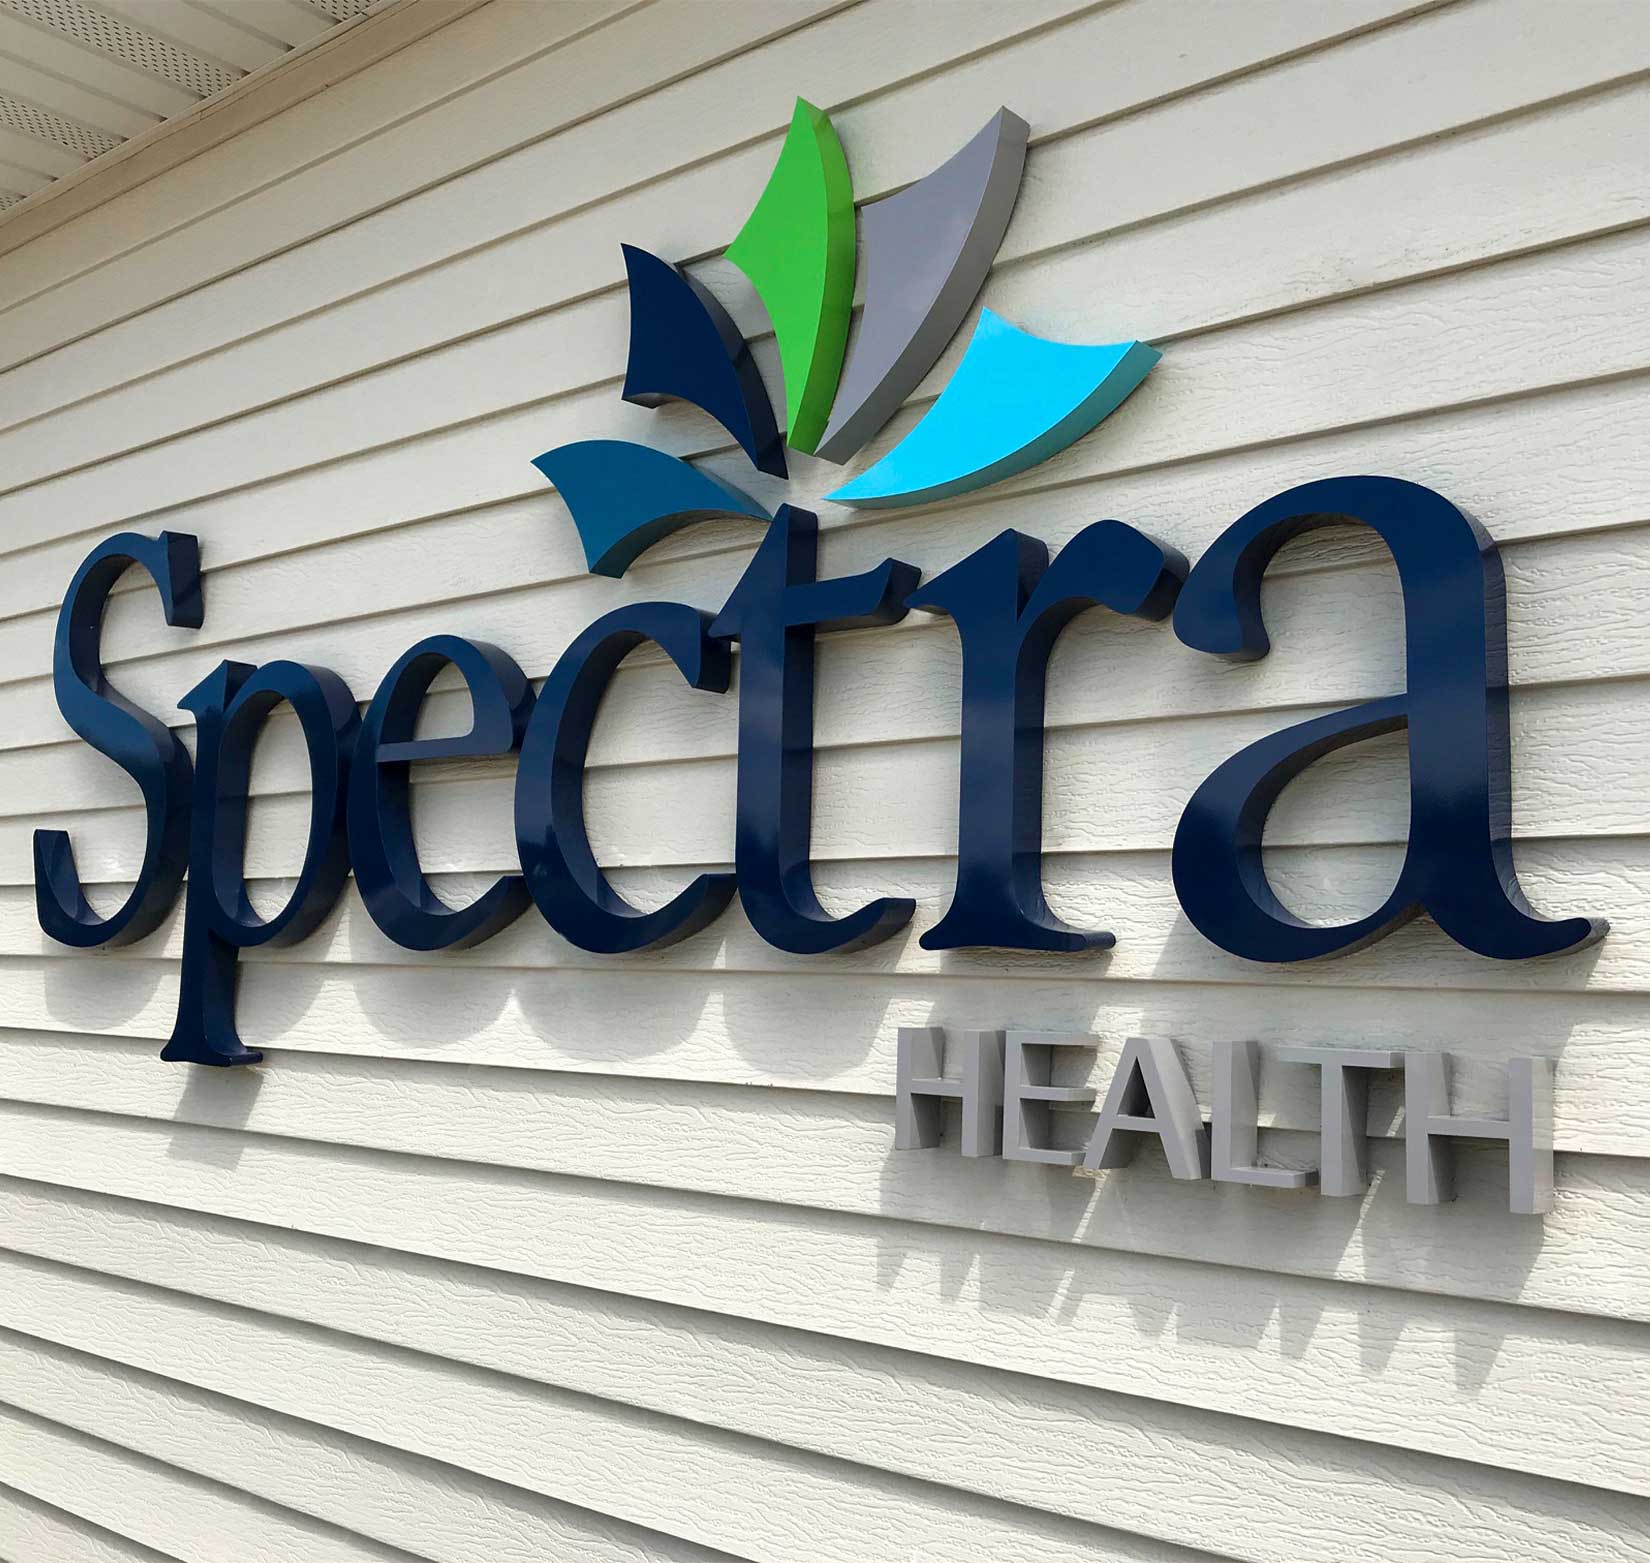 A sign of Spectra Health’s logo installed outside of a building